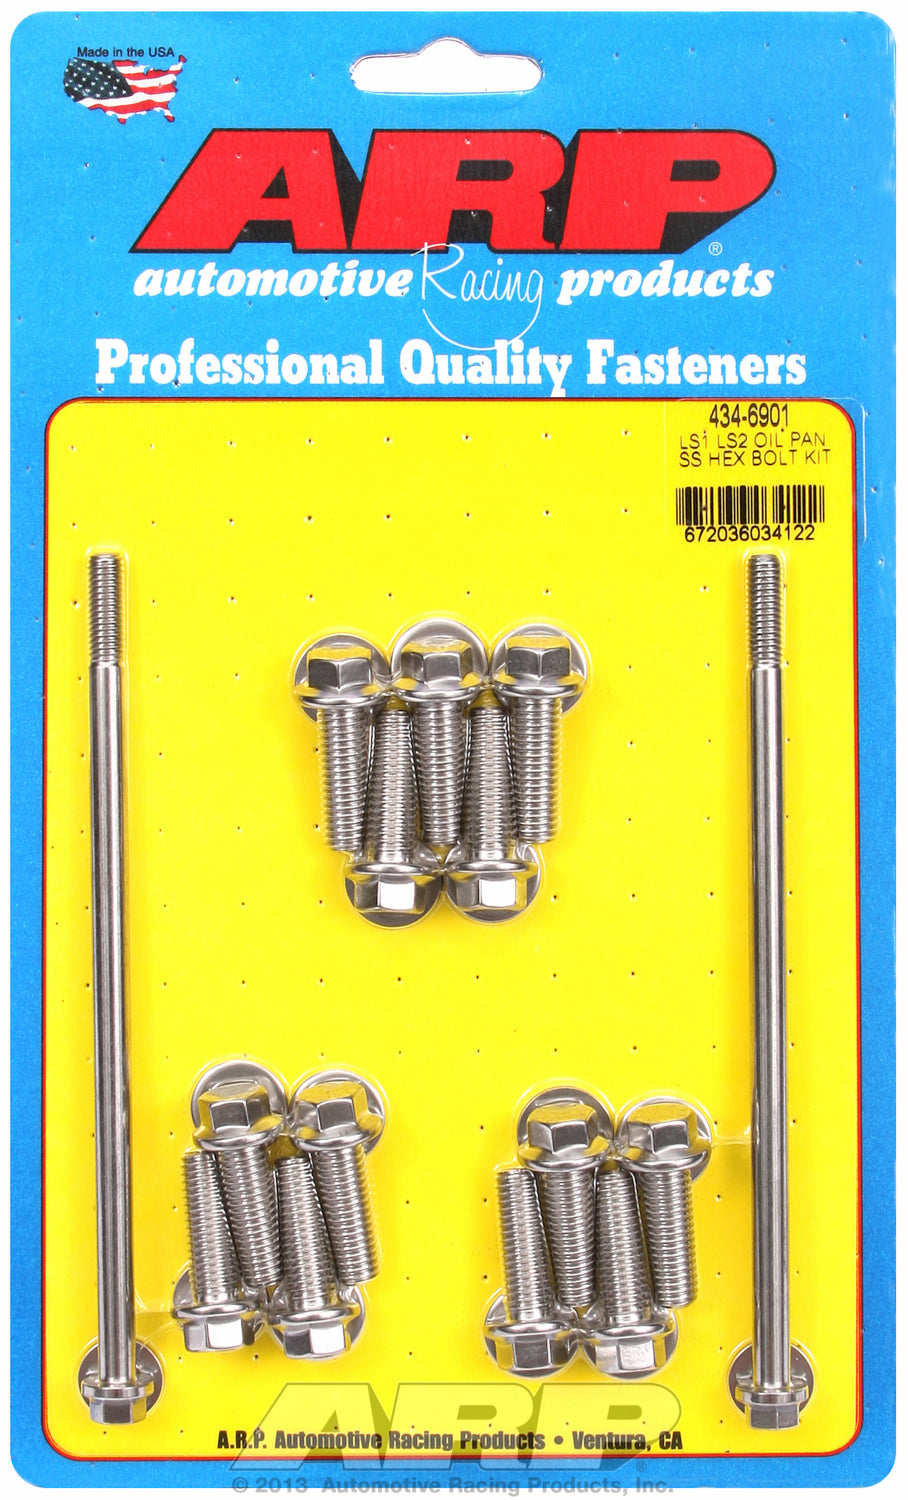 Hex Head Stainless Oil Pan Bolt Kit for Chevrolet Gen III/IV LS Series small block